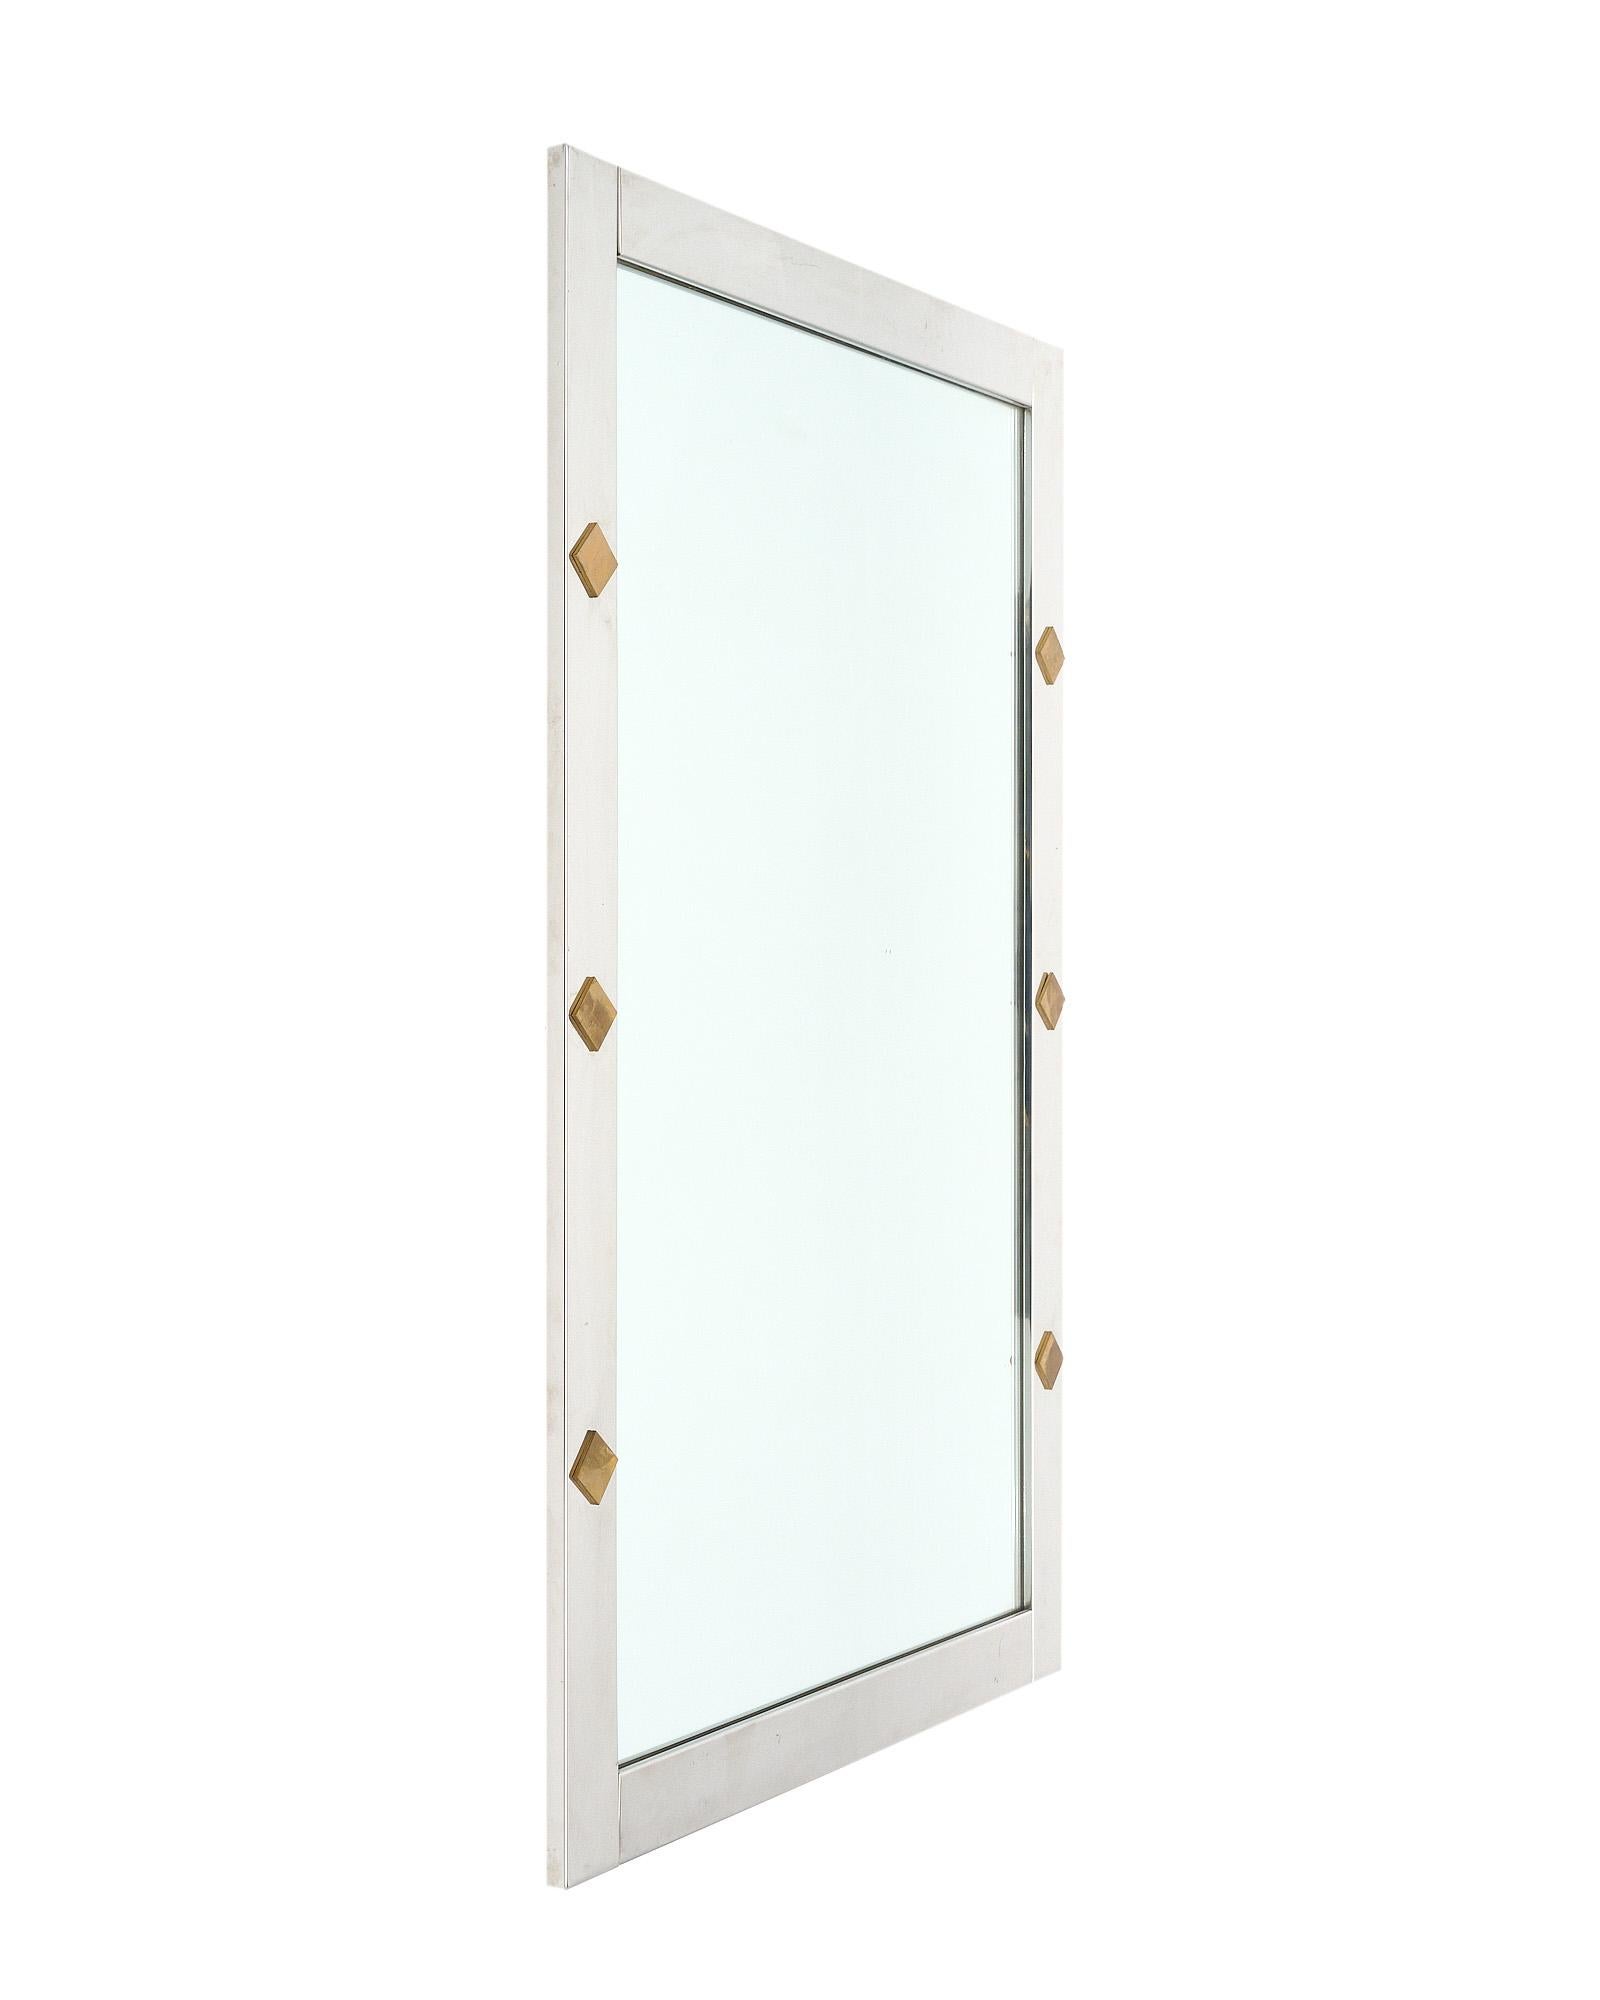 Mirror from France with a chrome, sleek frame adorned with brass square components. The interior rectangular mirror is original.
